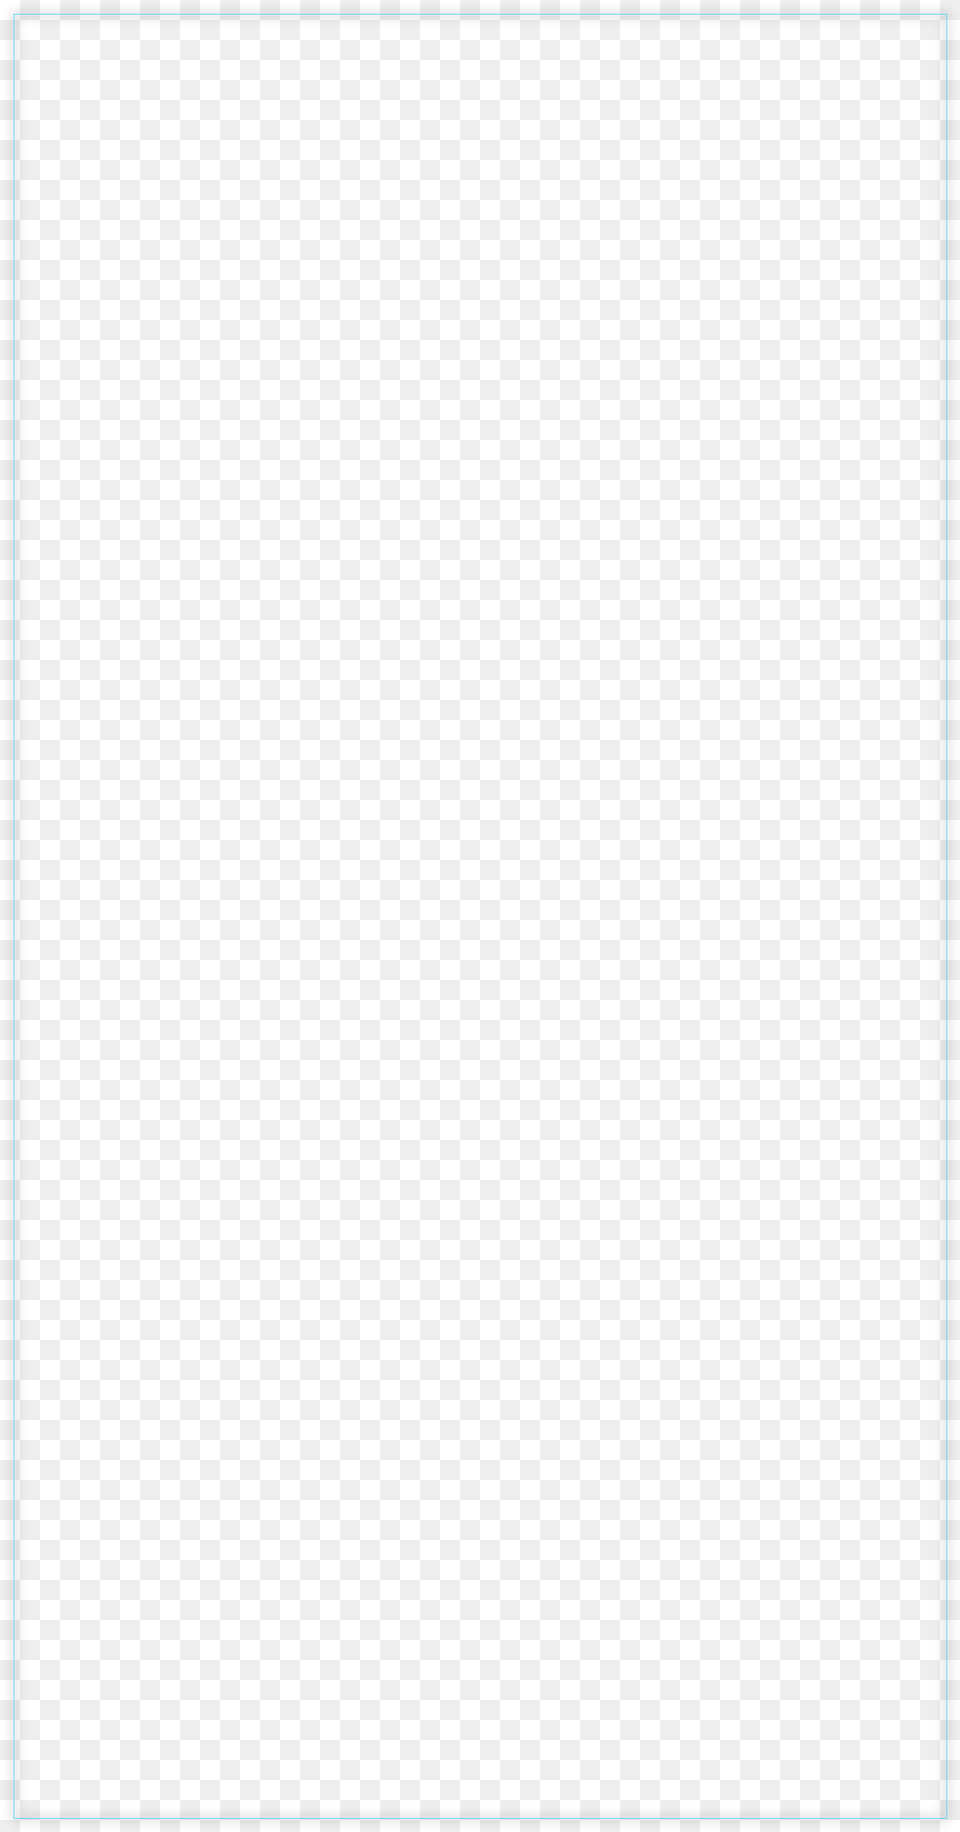 Bkgd Shadow Free Transparent Png